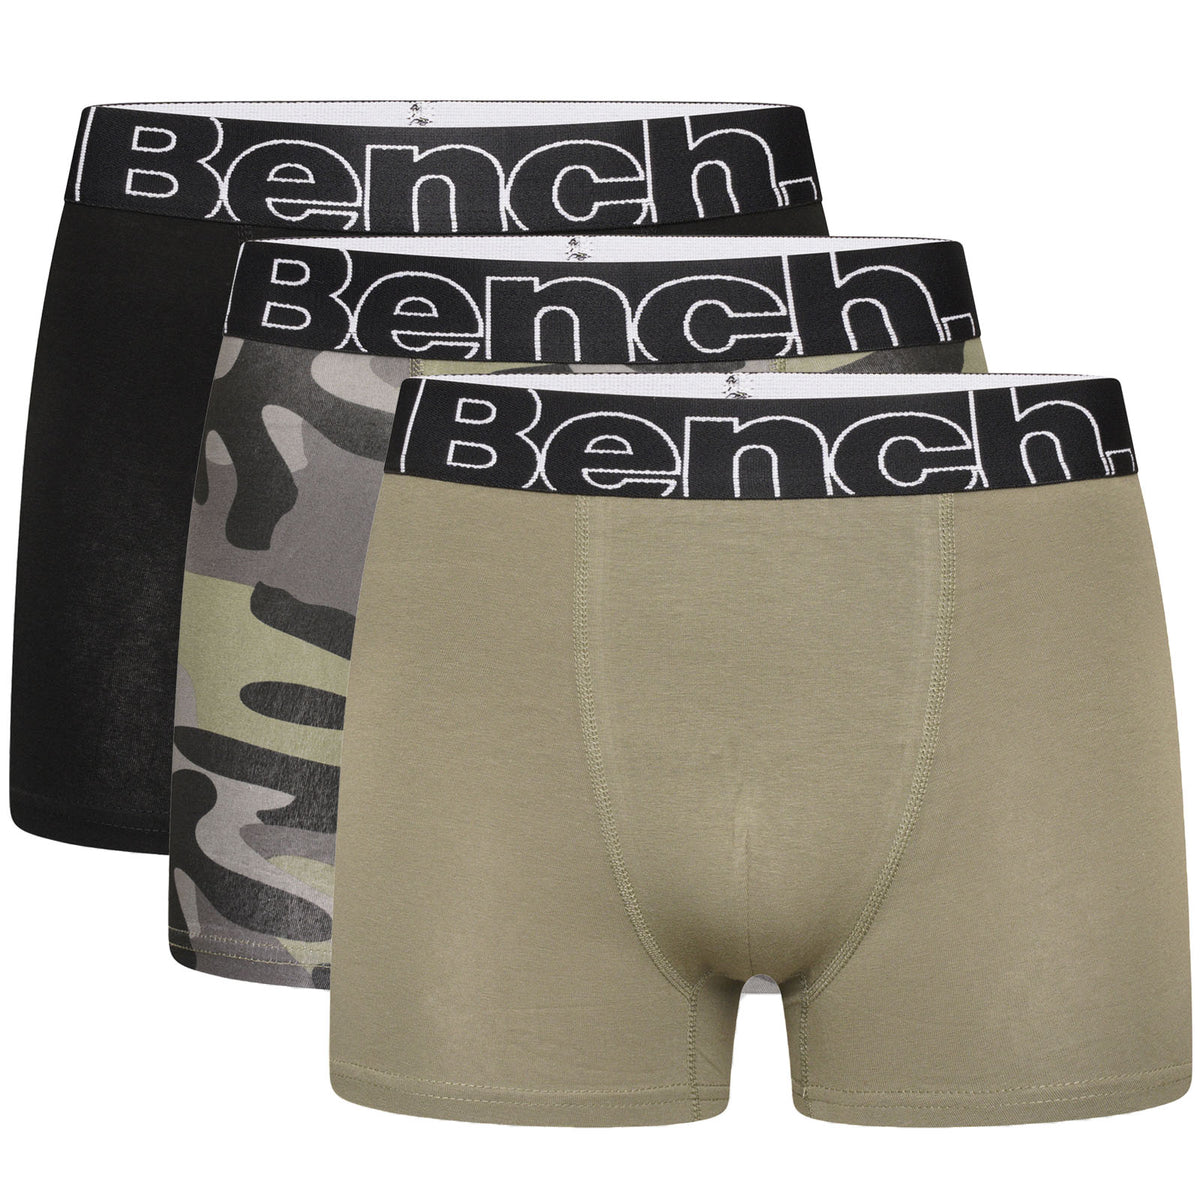 Bench Mens Bowden 3 Pack Elasticated Underwear Boxers Boxer Shorts -  Assorted